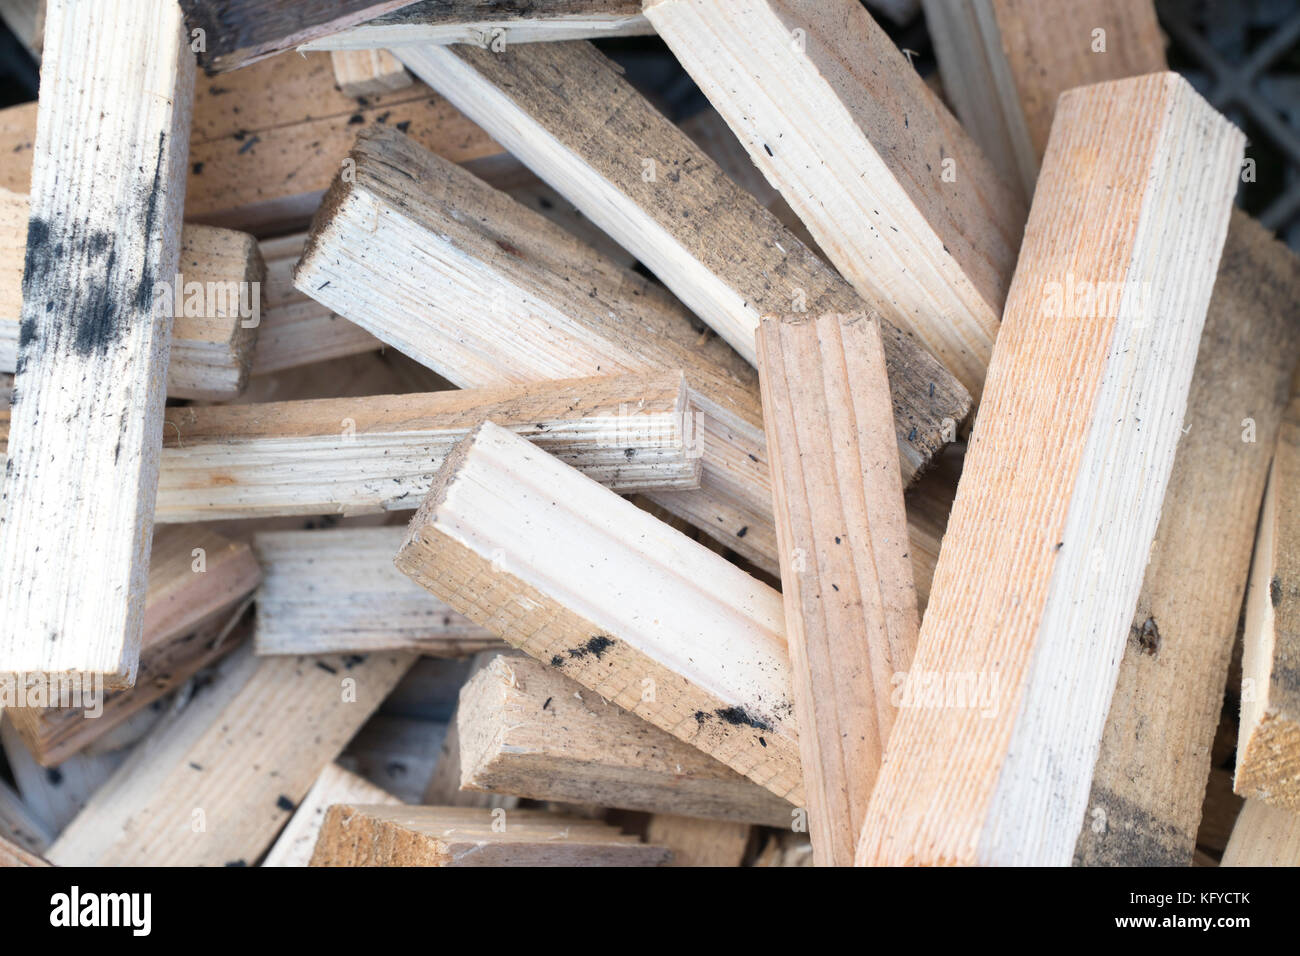 Sawn timber for the stove Stock Photo